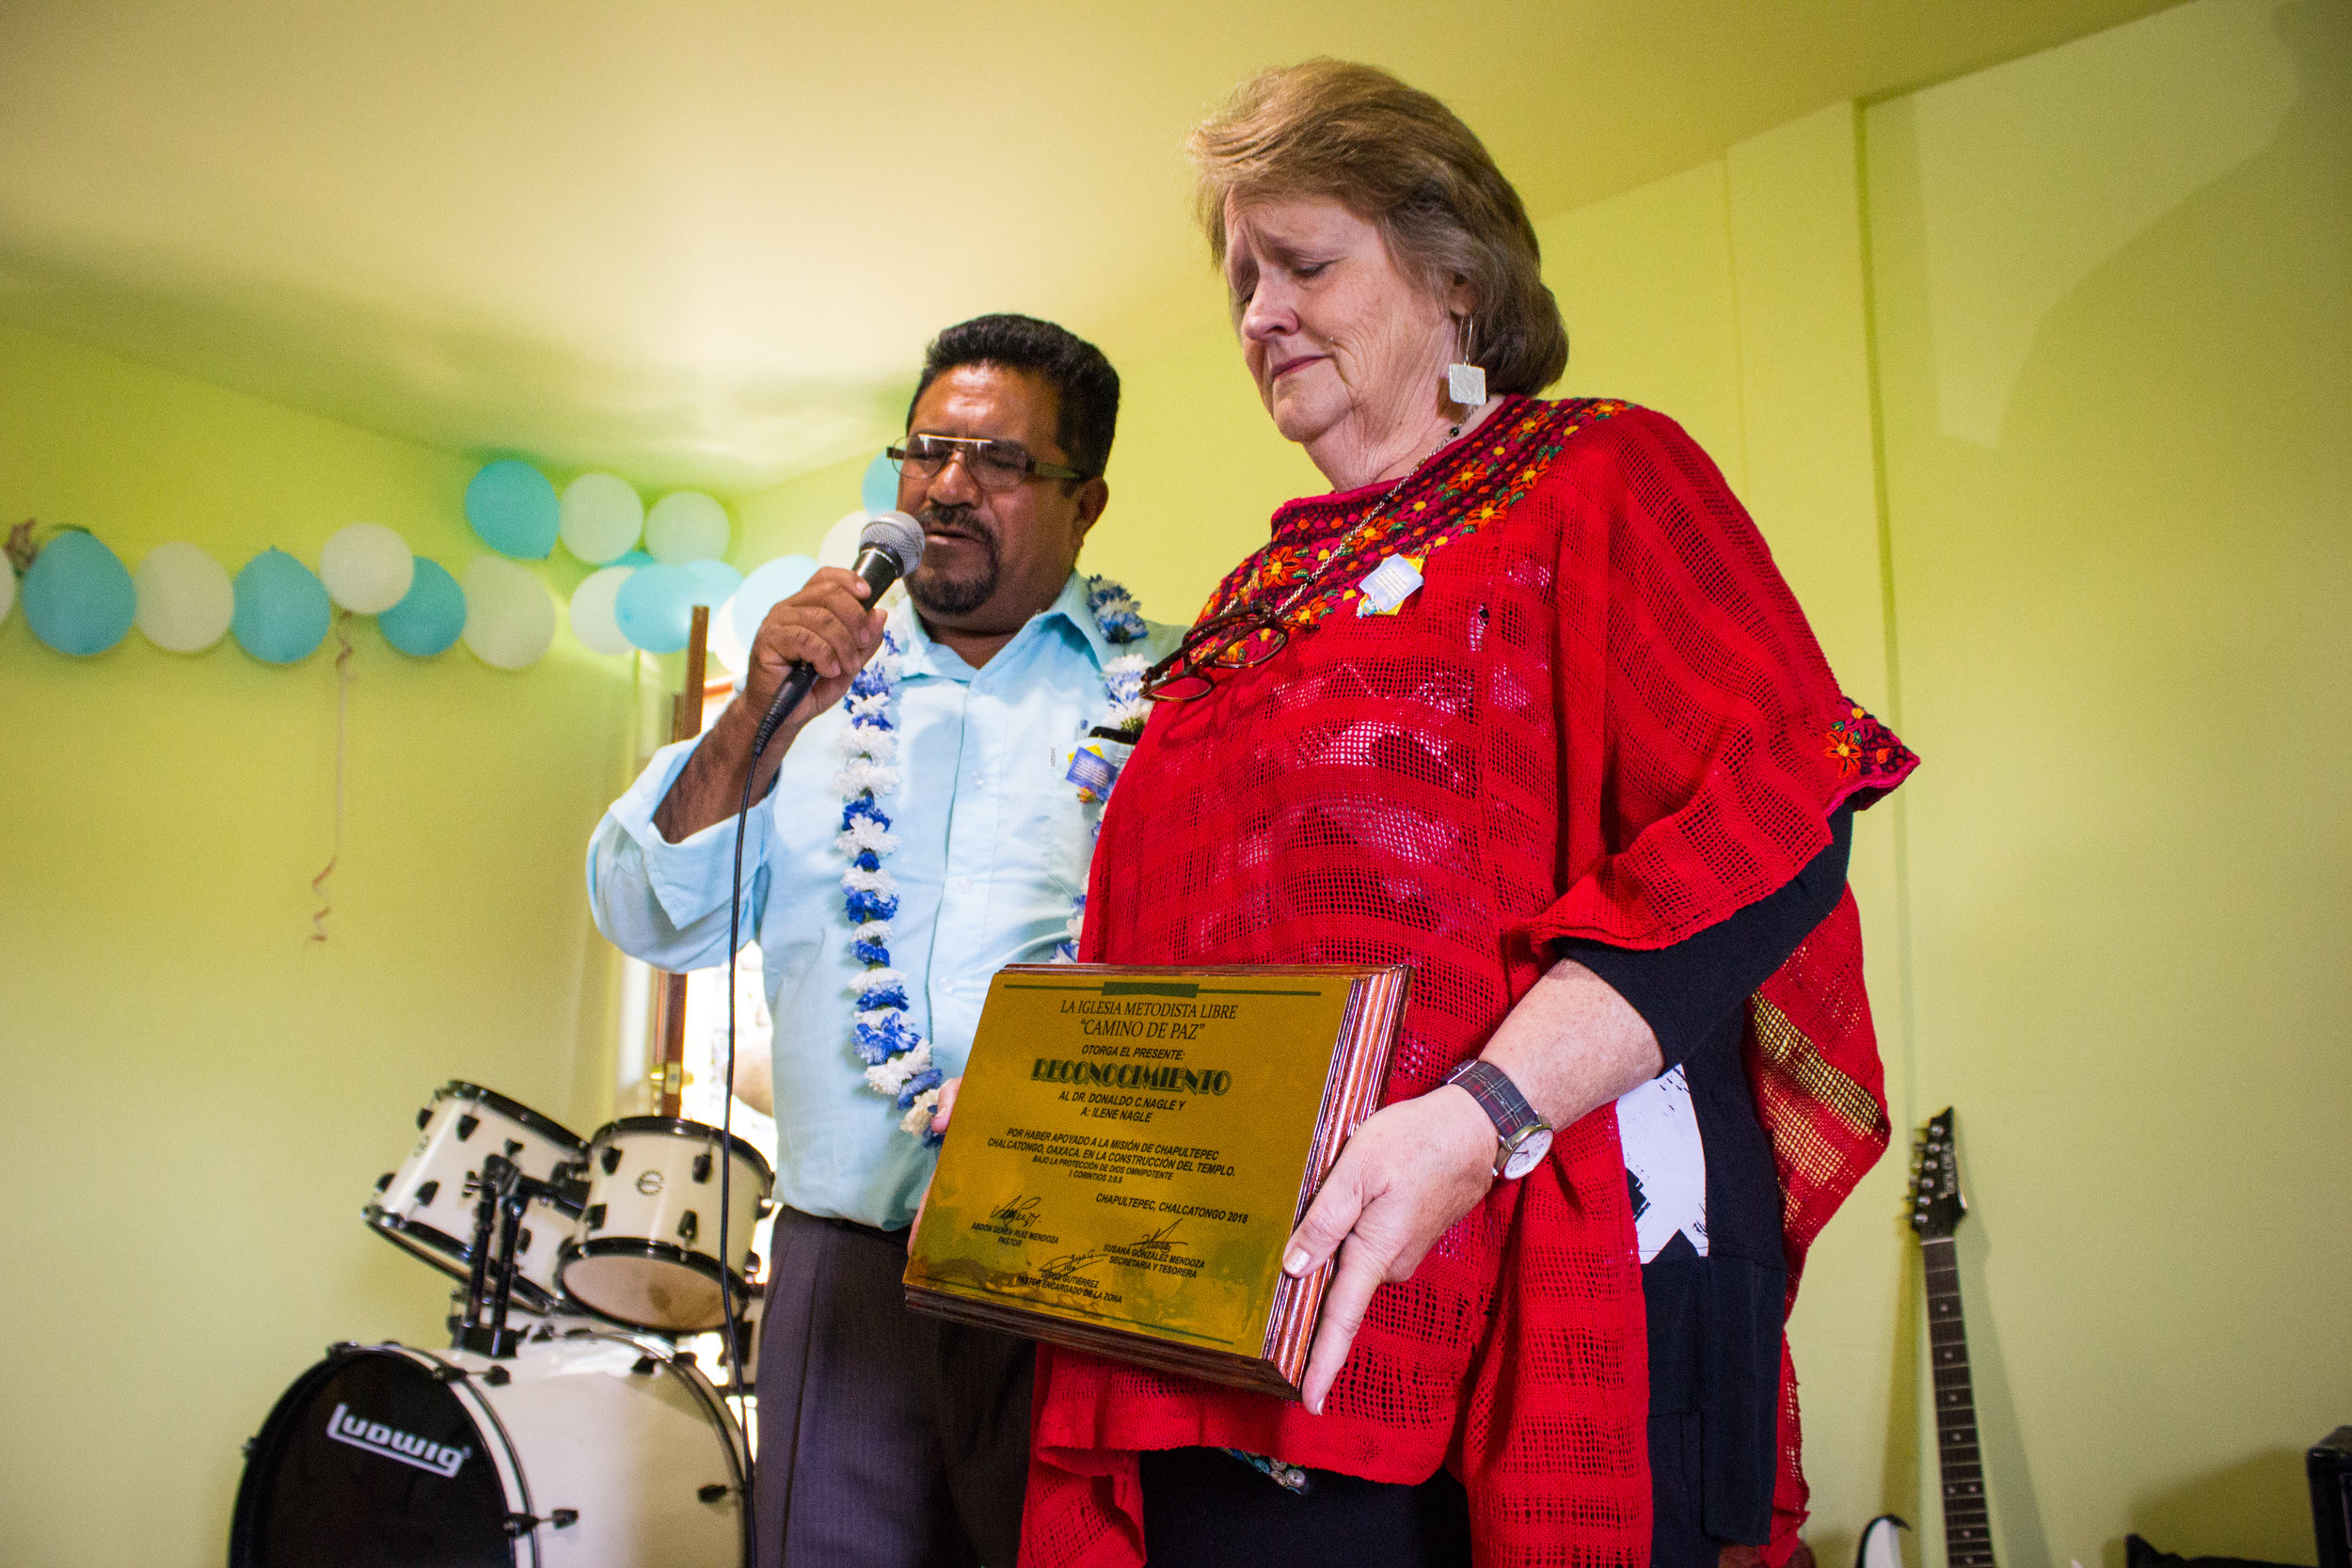  Ilene is overwhelmed when Senen and the other pastors present her with a plaque of gratitude. It is no small feat for them to honor her in this way, in a village where items like this are not made locally. 